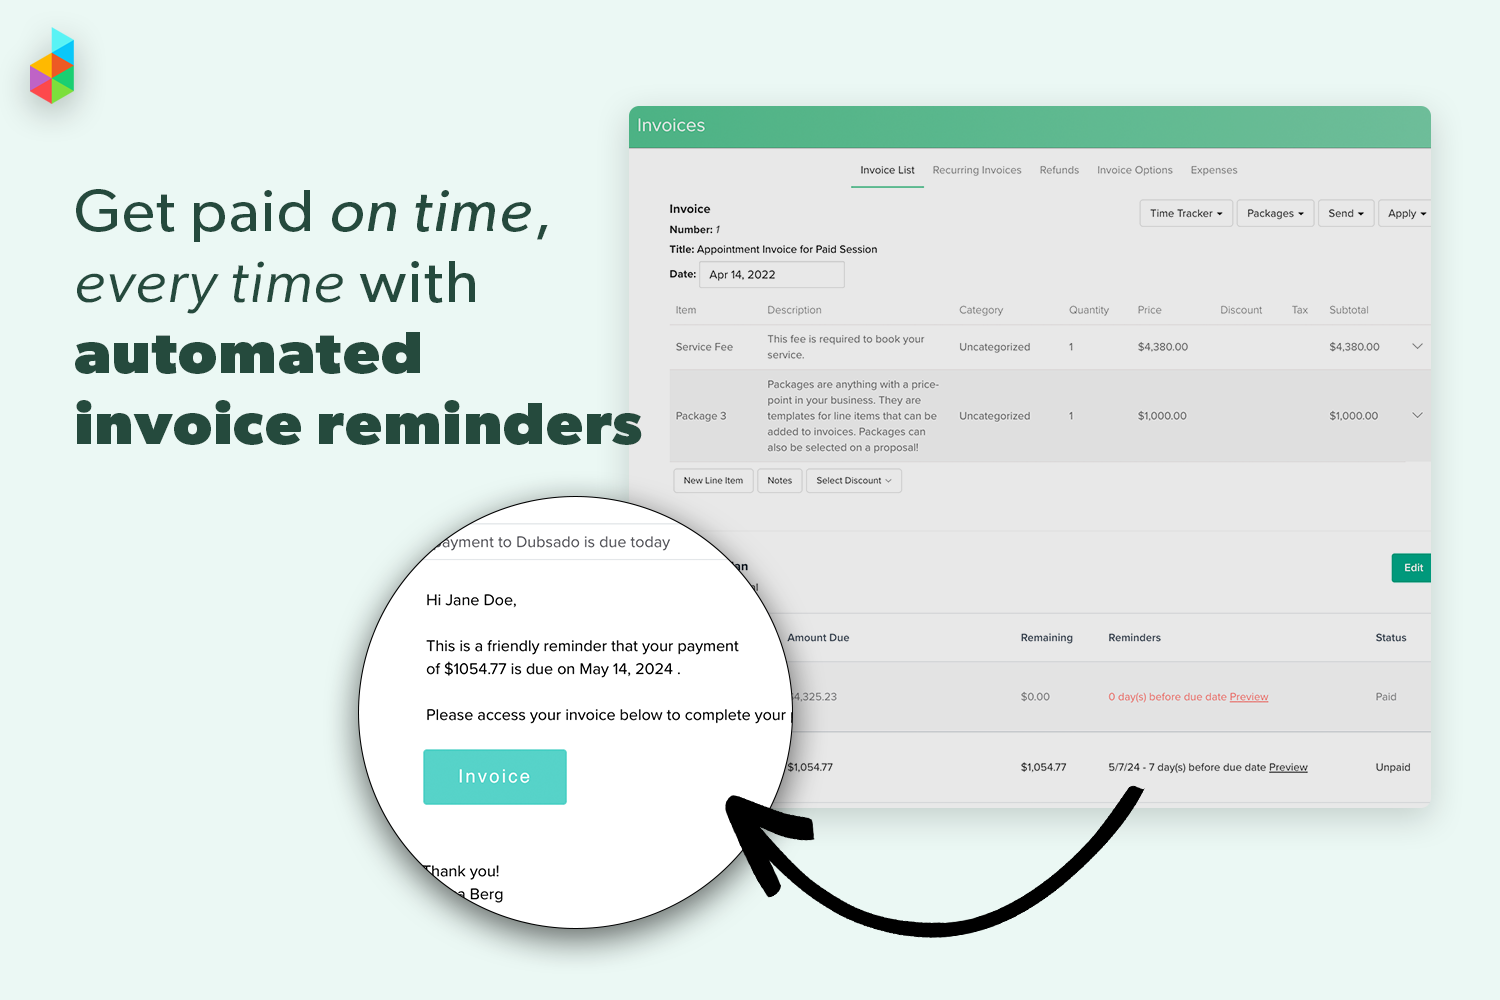 Dubsado Software - Text: "Get paid on time, every time with automated invoice reminders." Image: Screenshot of automated email with invoice information and button to pay